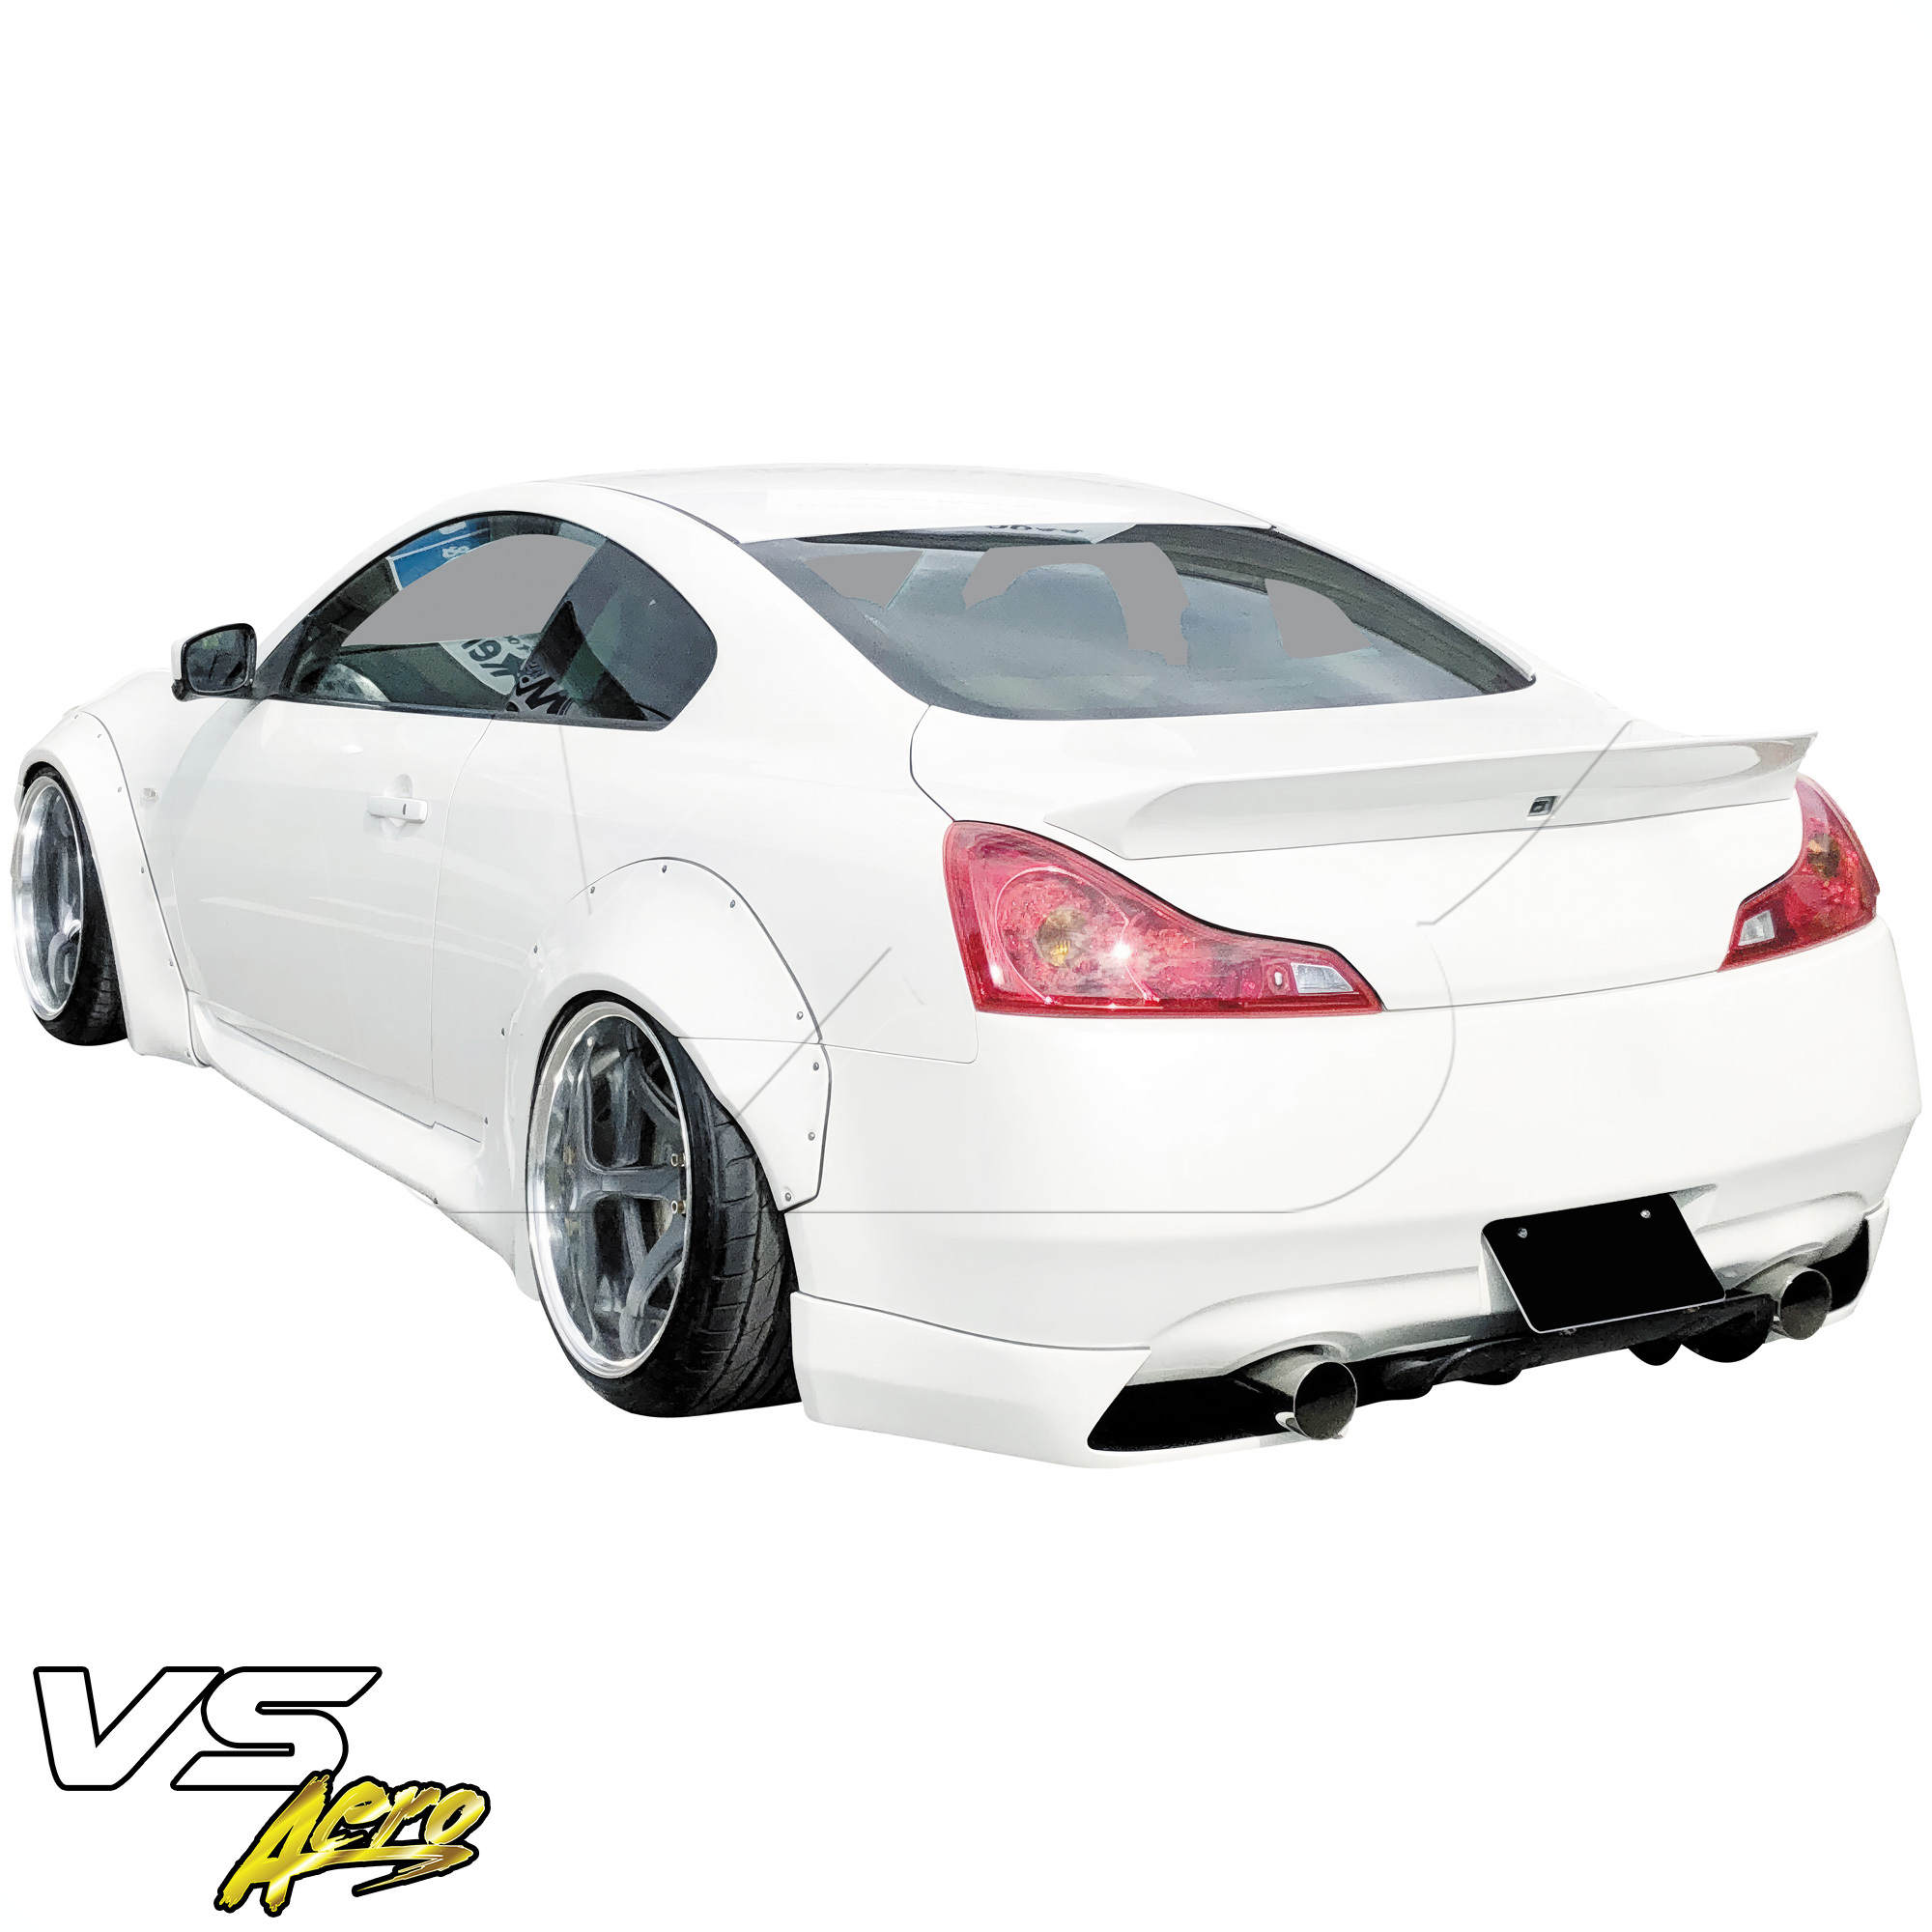 VSaero FRP LBPE Wide Body Fender Flares (rear) 4pc > Infiniti G37 Coupe 2008-2015 > 2dr Coupe - Image 30